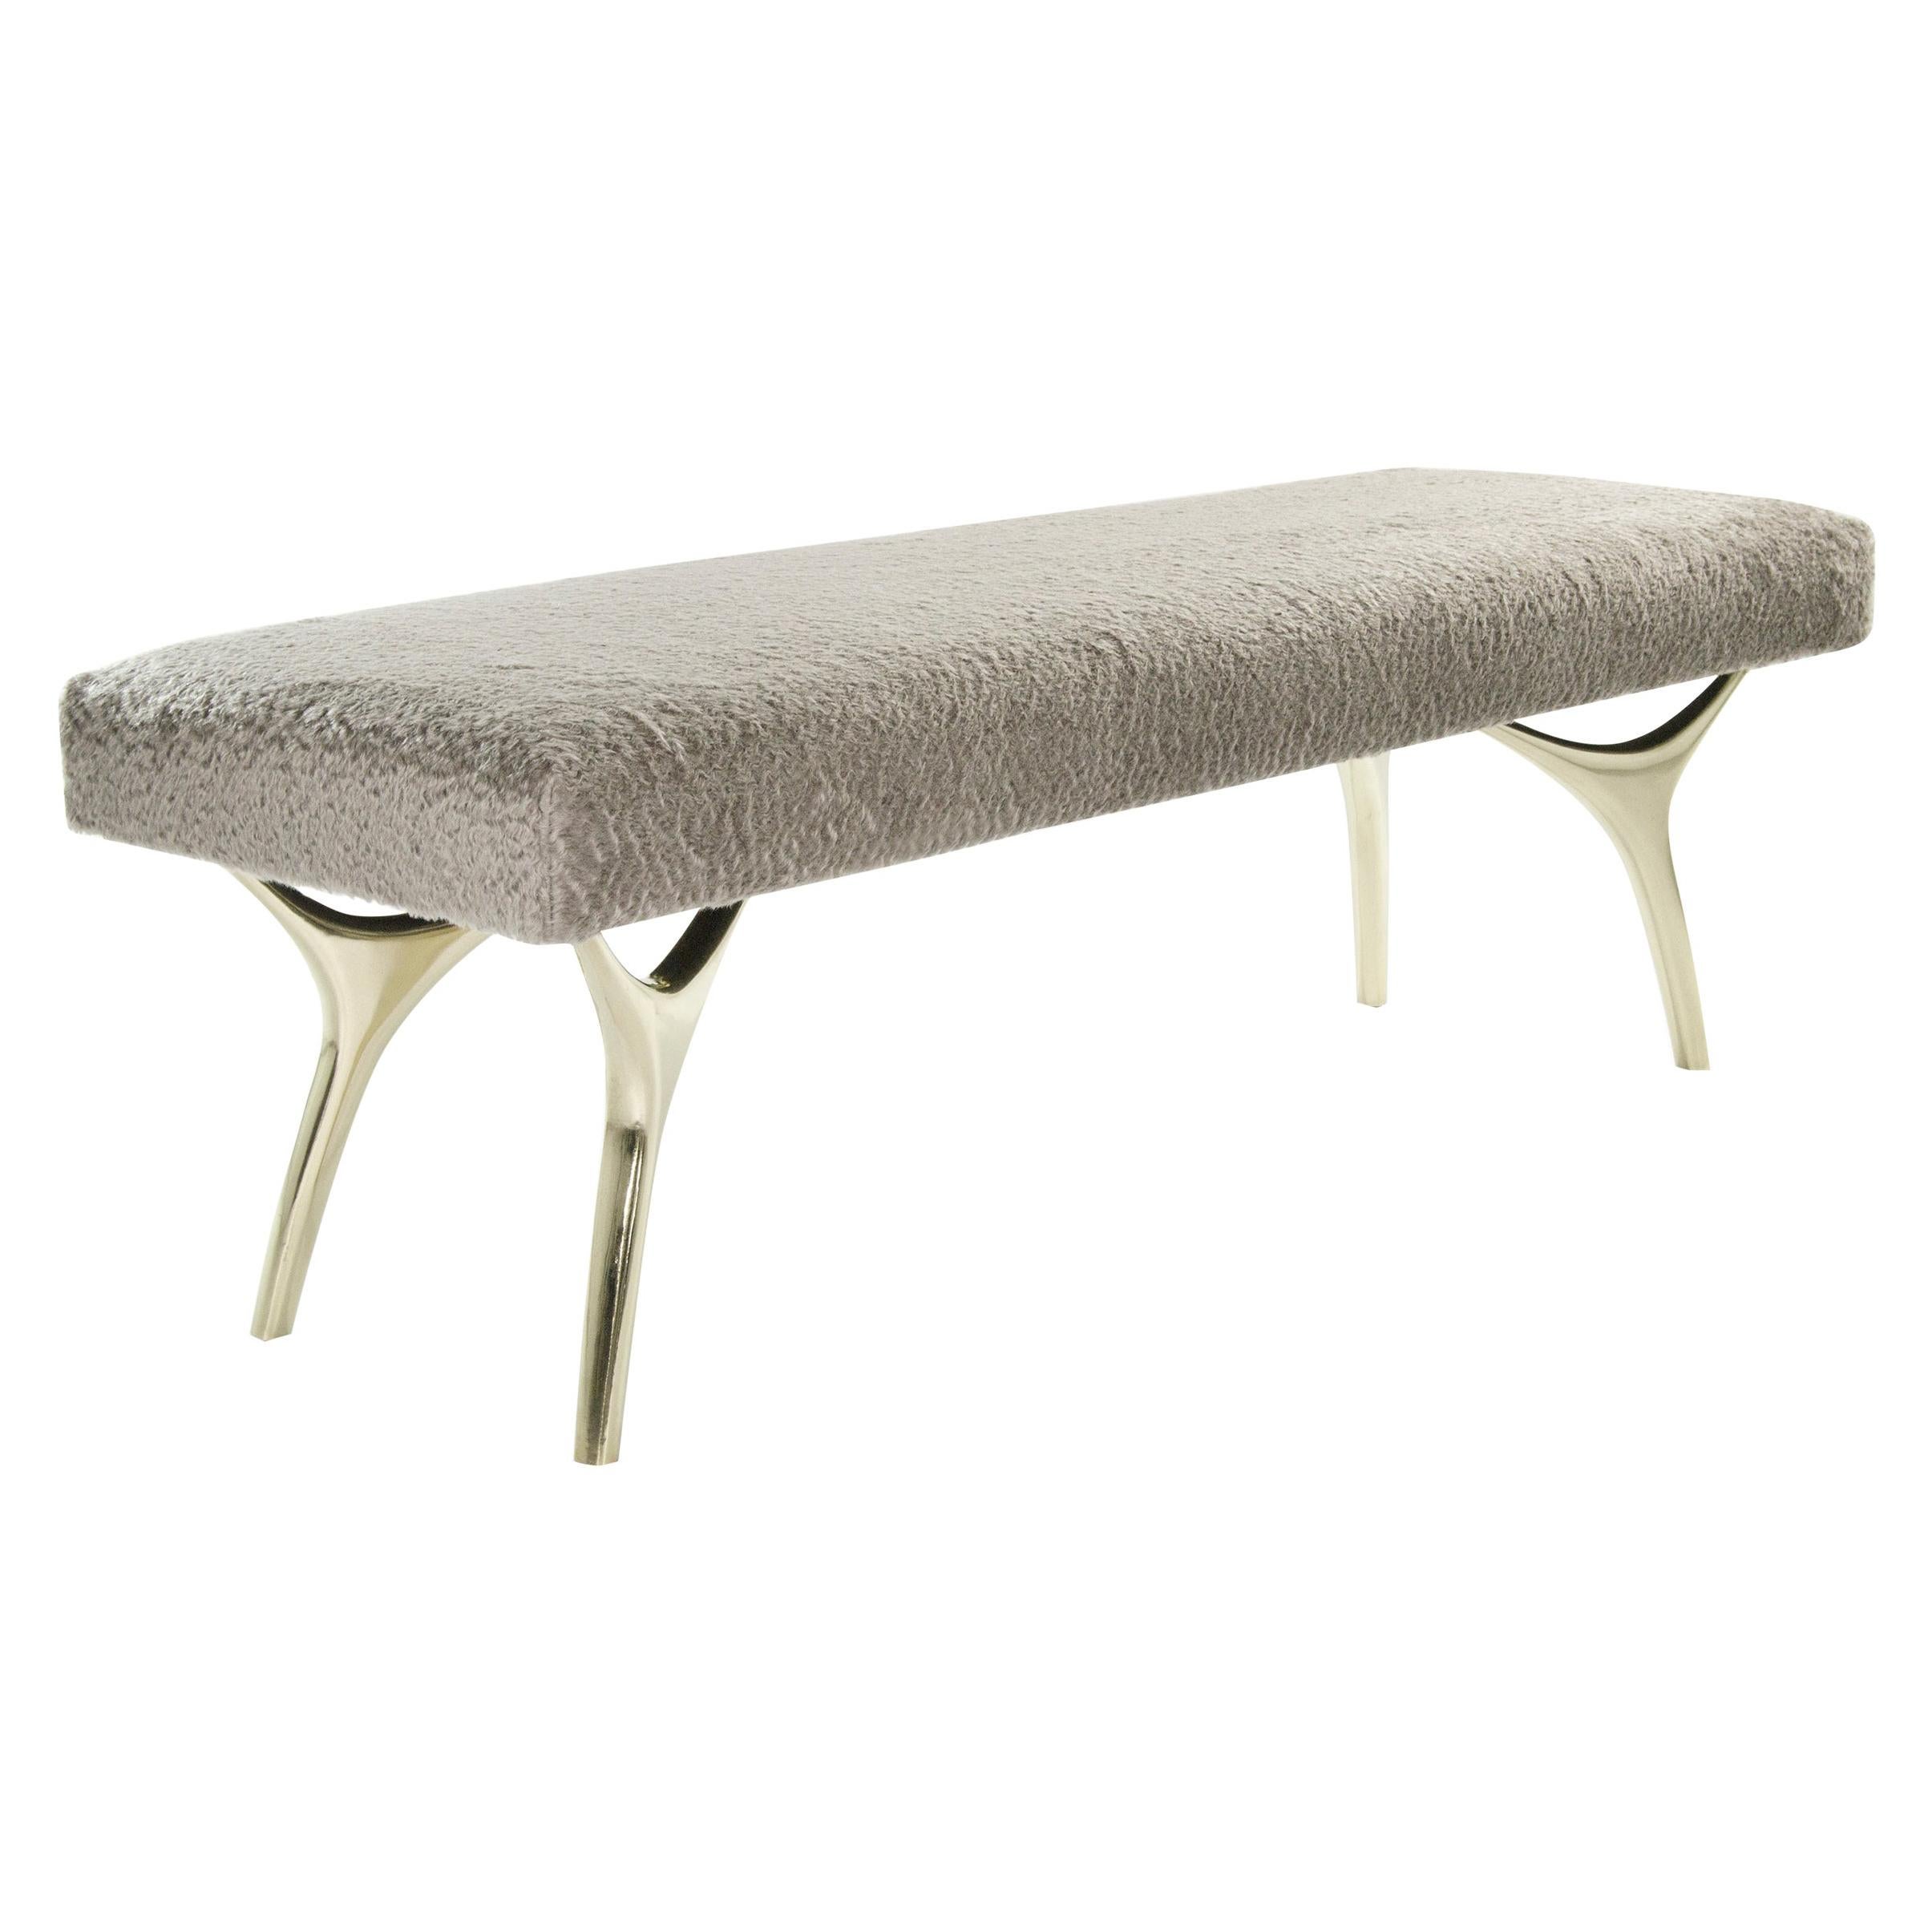 The Crescent Bench by Carlos Solano for Stamford Modern a remarkable blend of elegance, stability, and artistic craftsmanship. This exquisite bench is designed to enhance any space with its captivating presence and exceptional functionality.

 
The